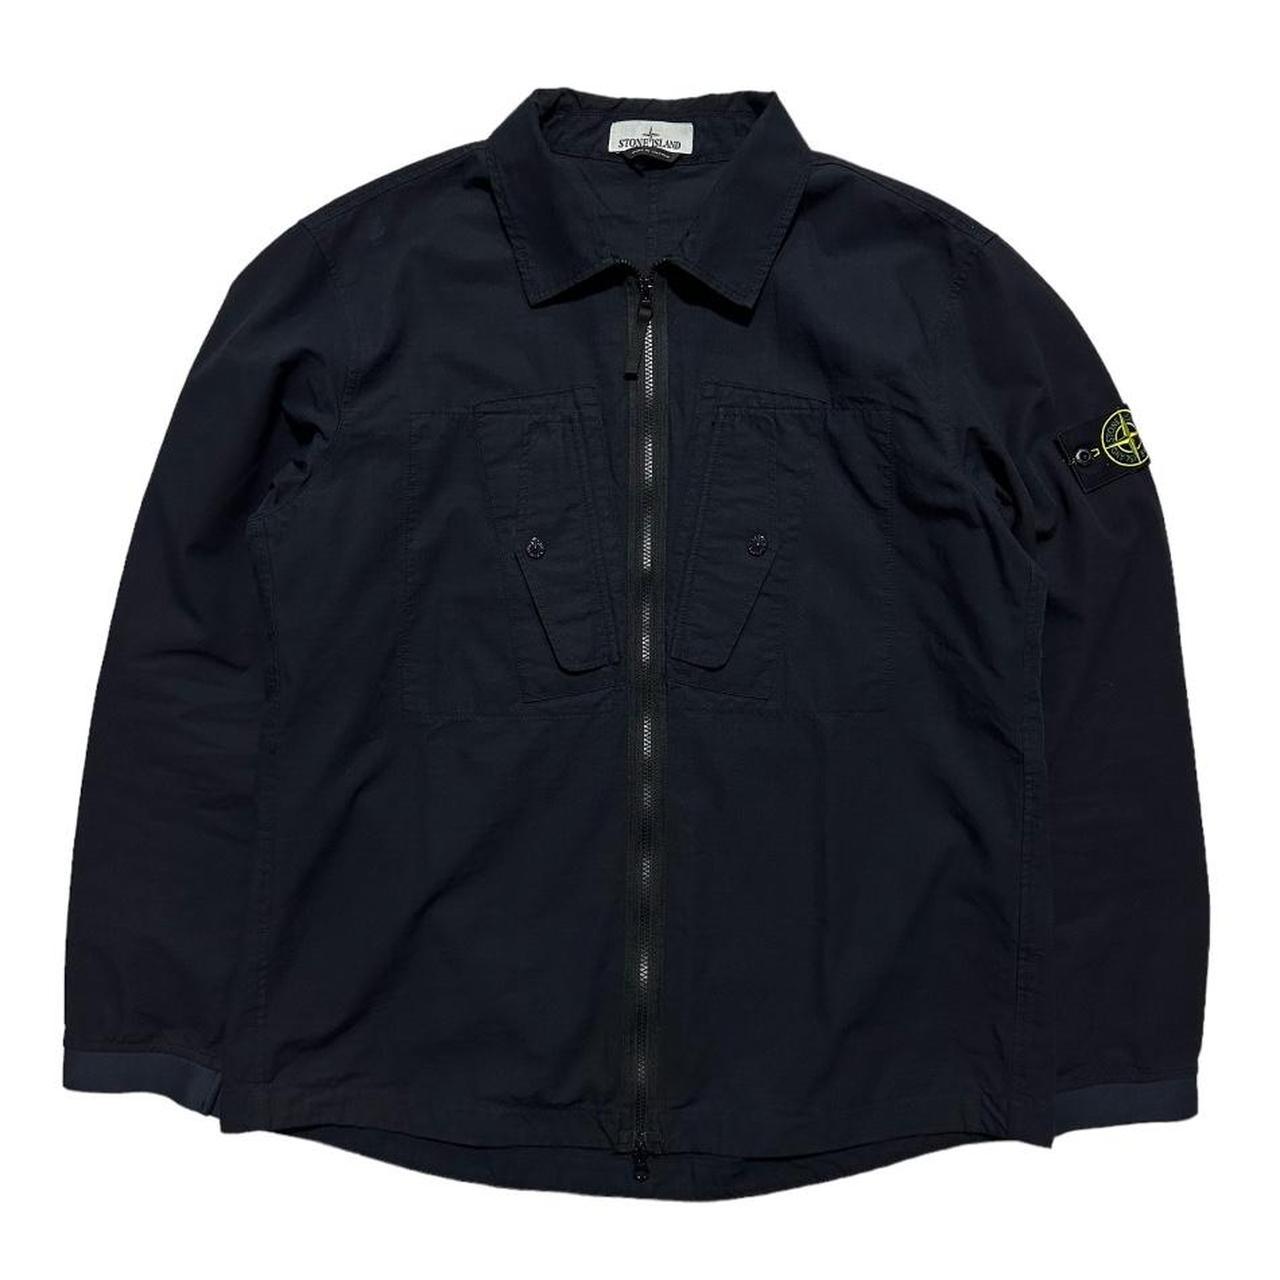 Stone Island Navy Double Pocket Overshirt - Known Source